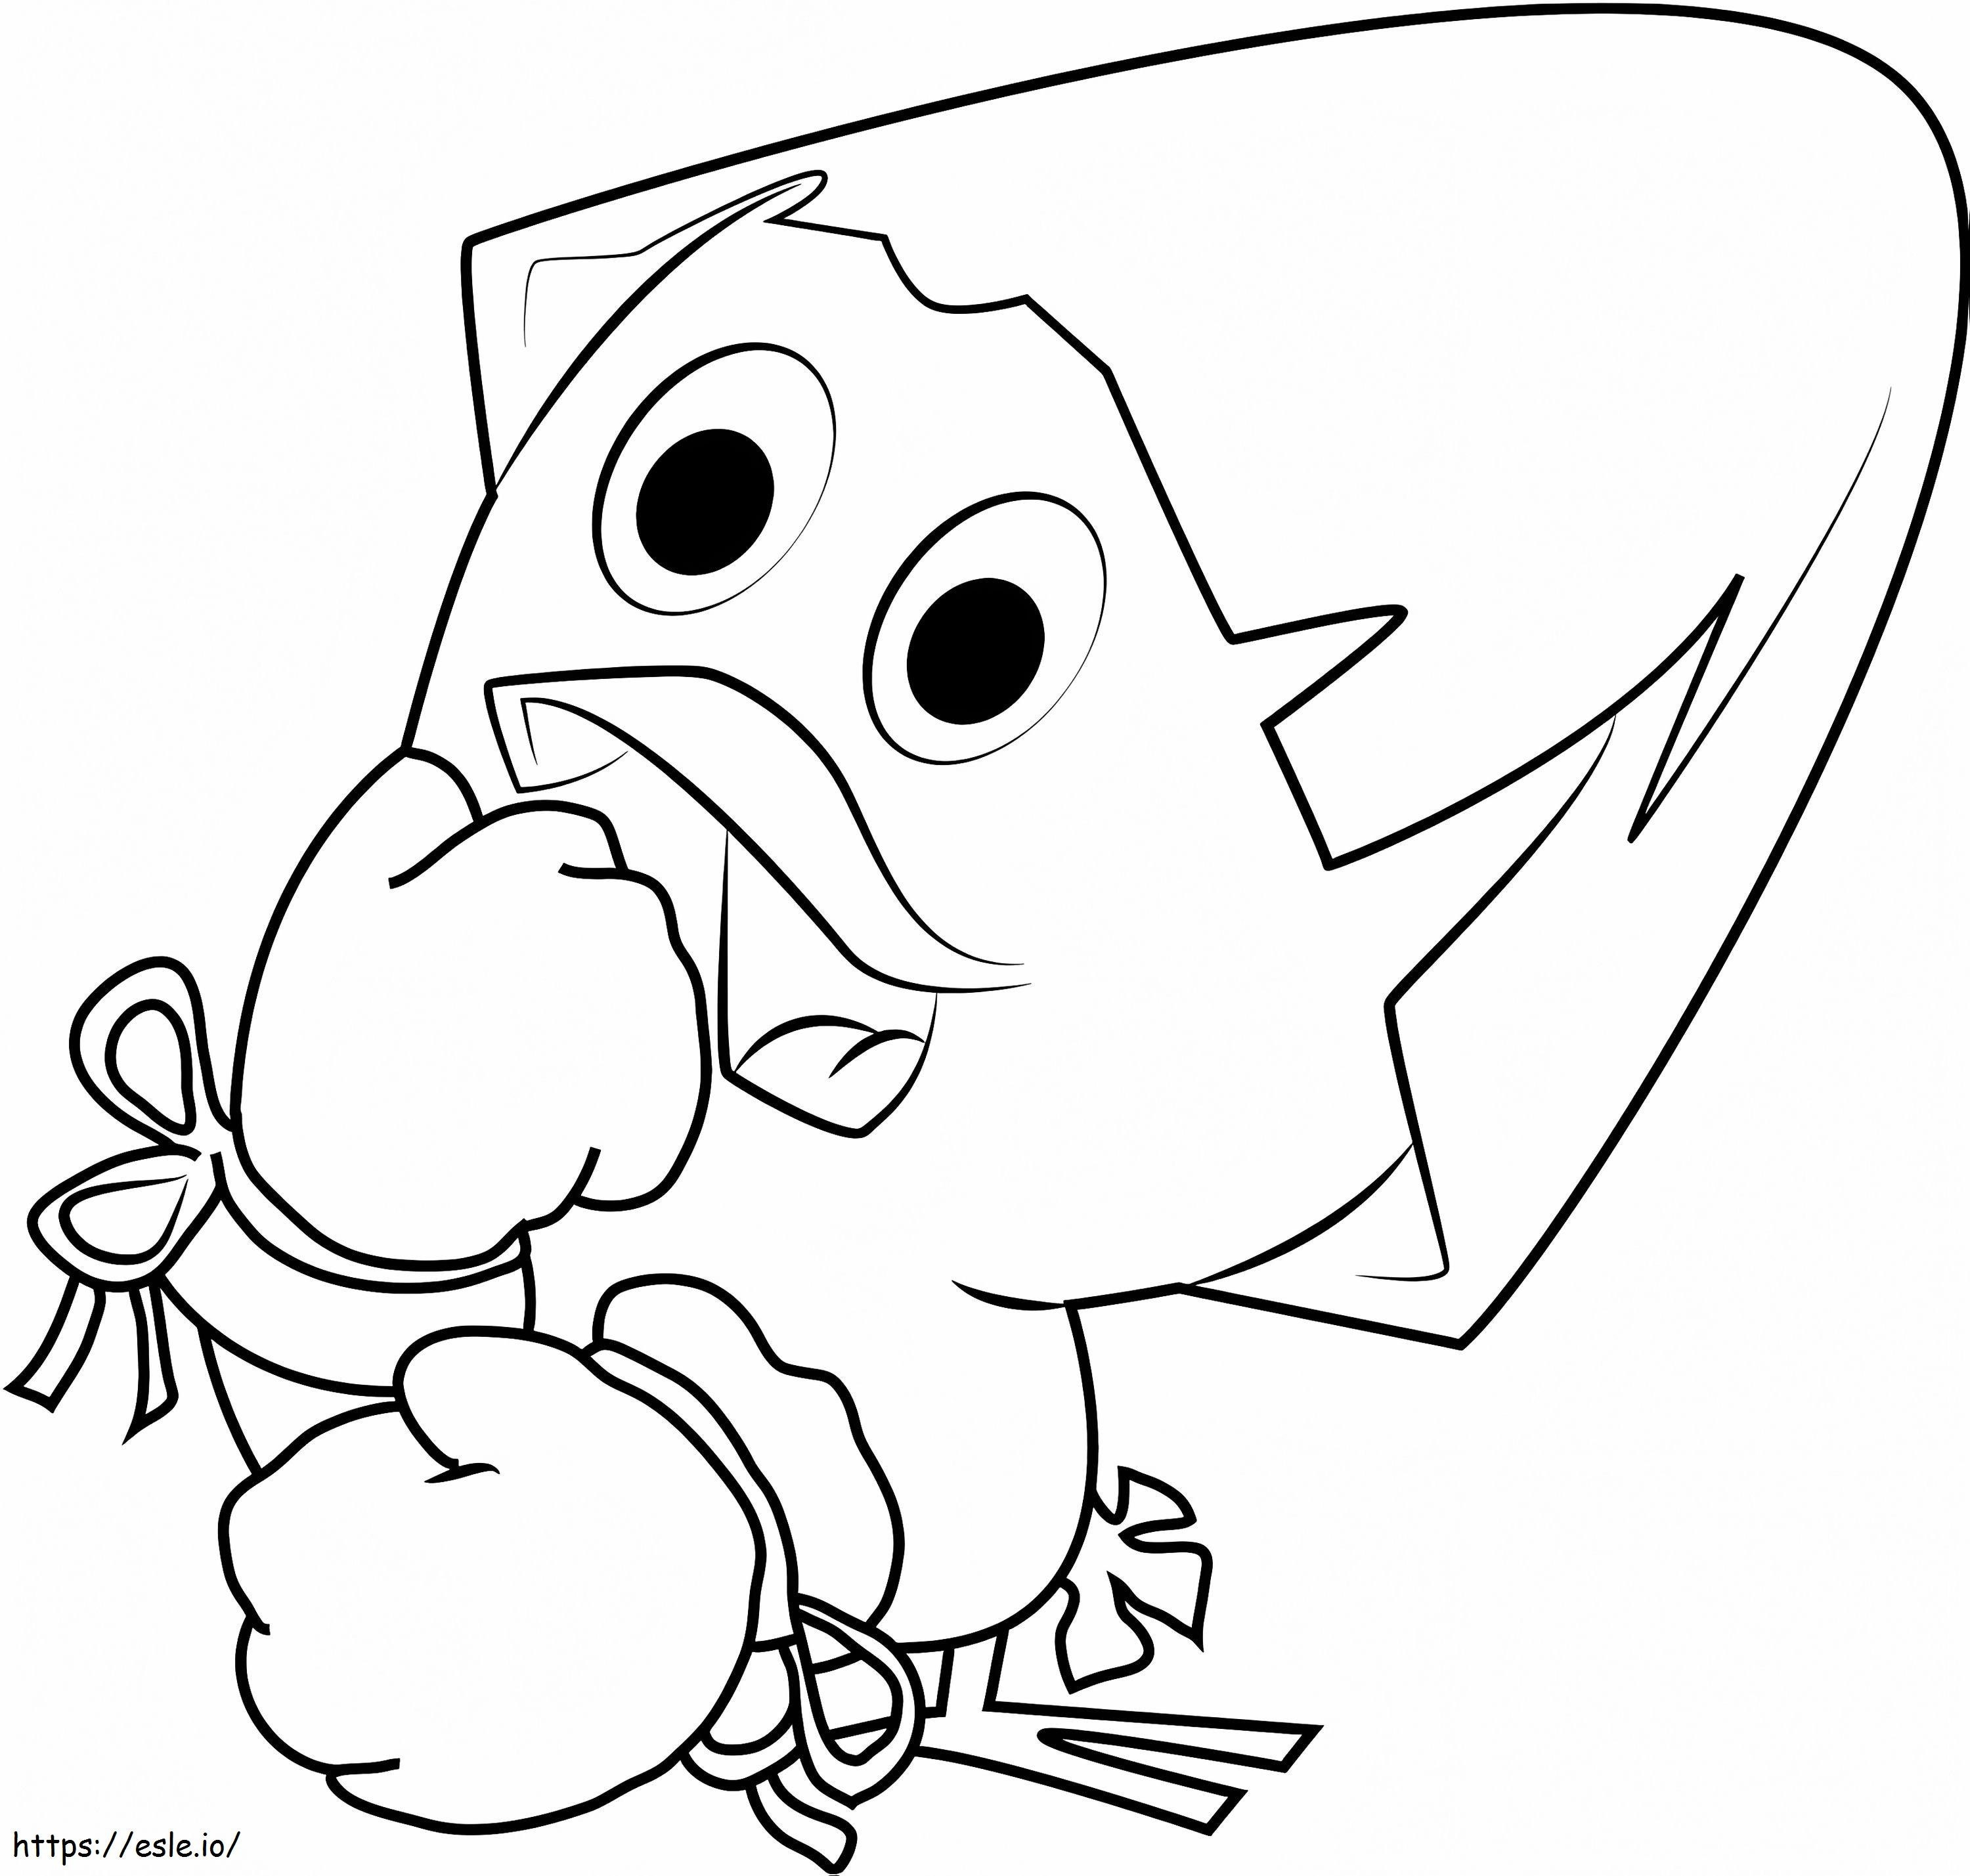 Calimero Boxing A4 coloring page